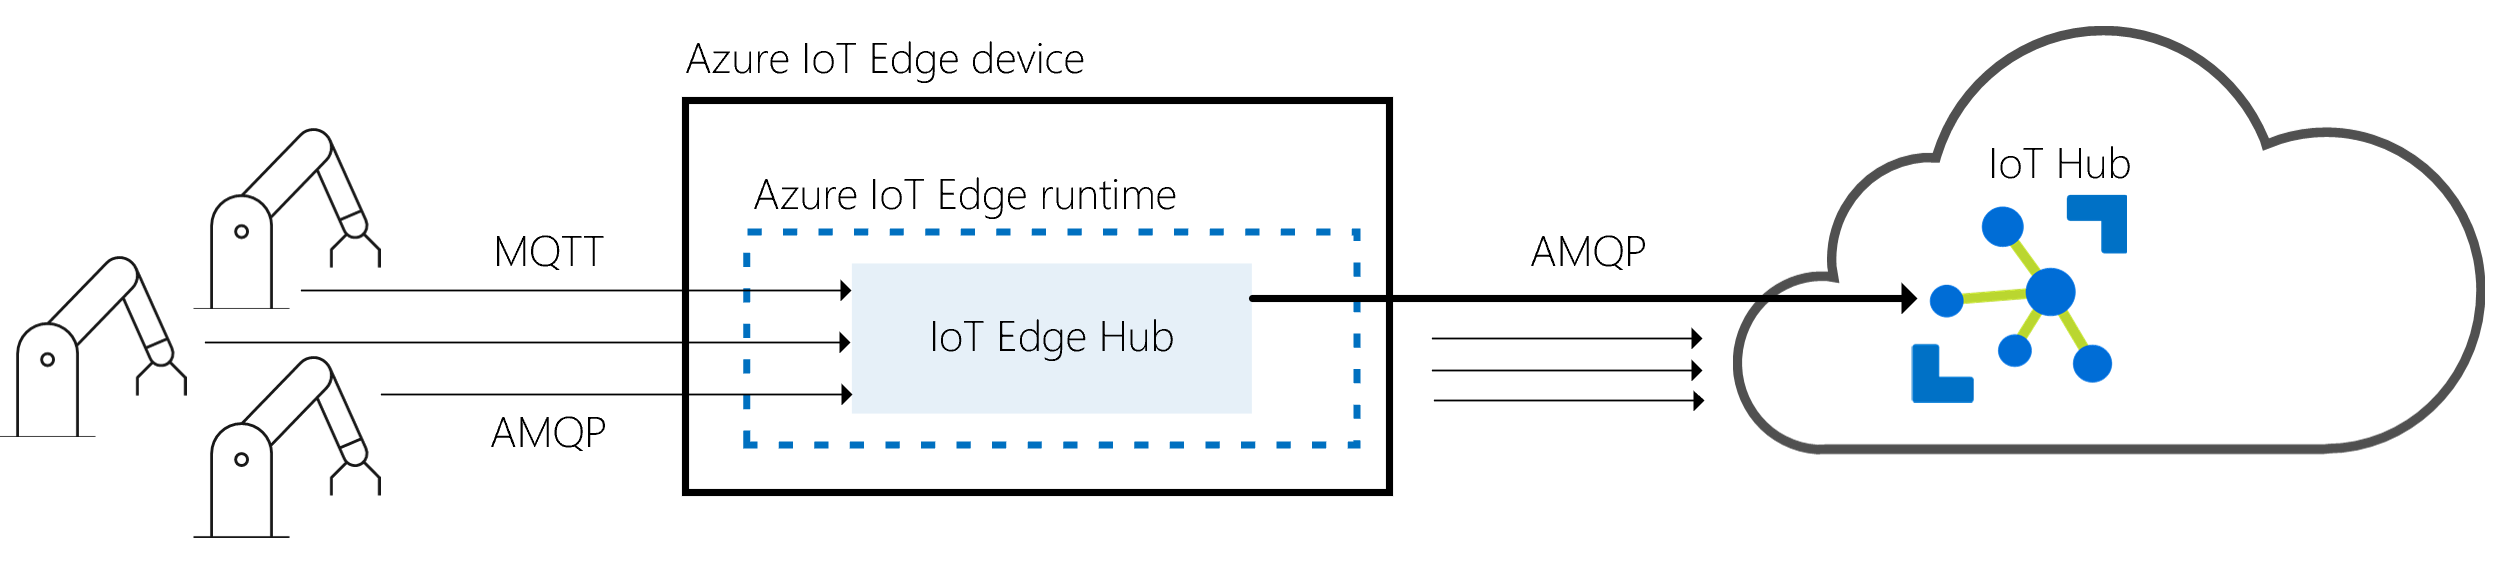 IoT Edge hub is a gateway between physical devices and IoT Hub